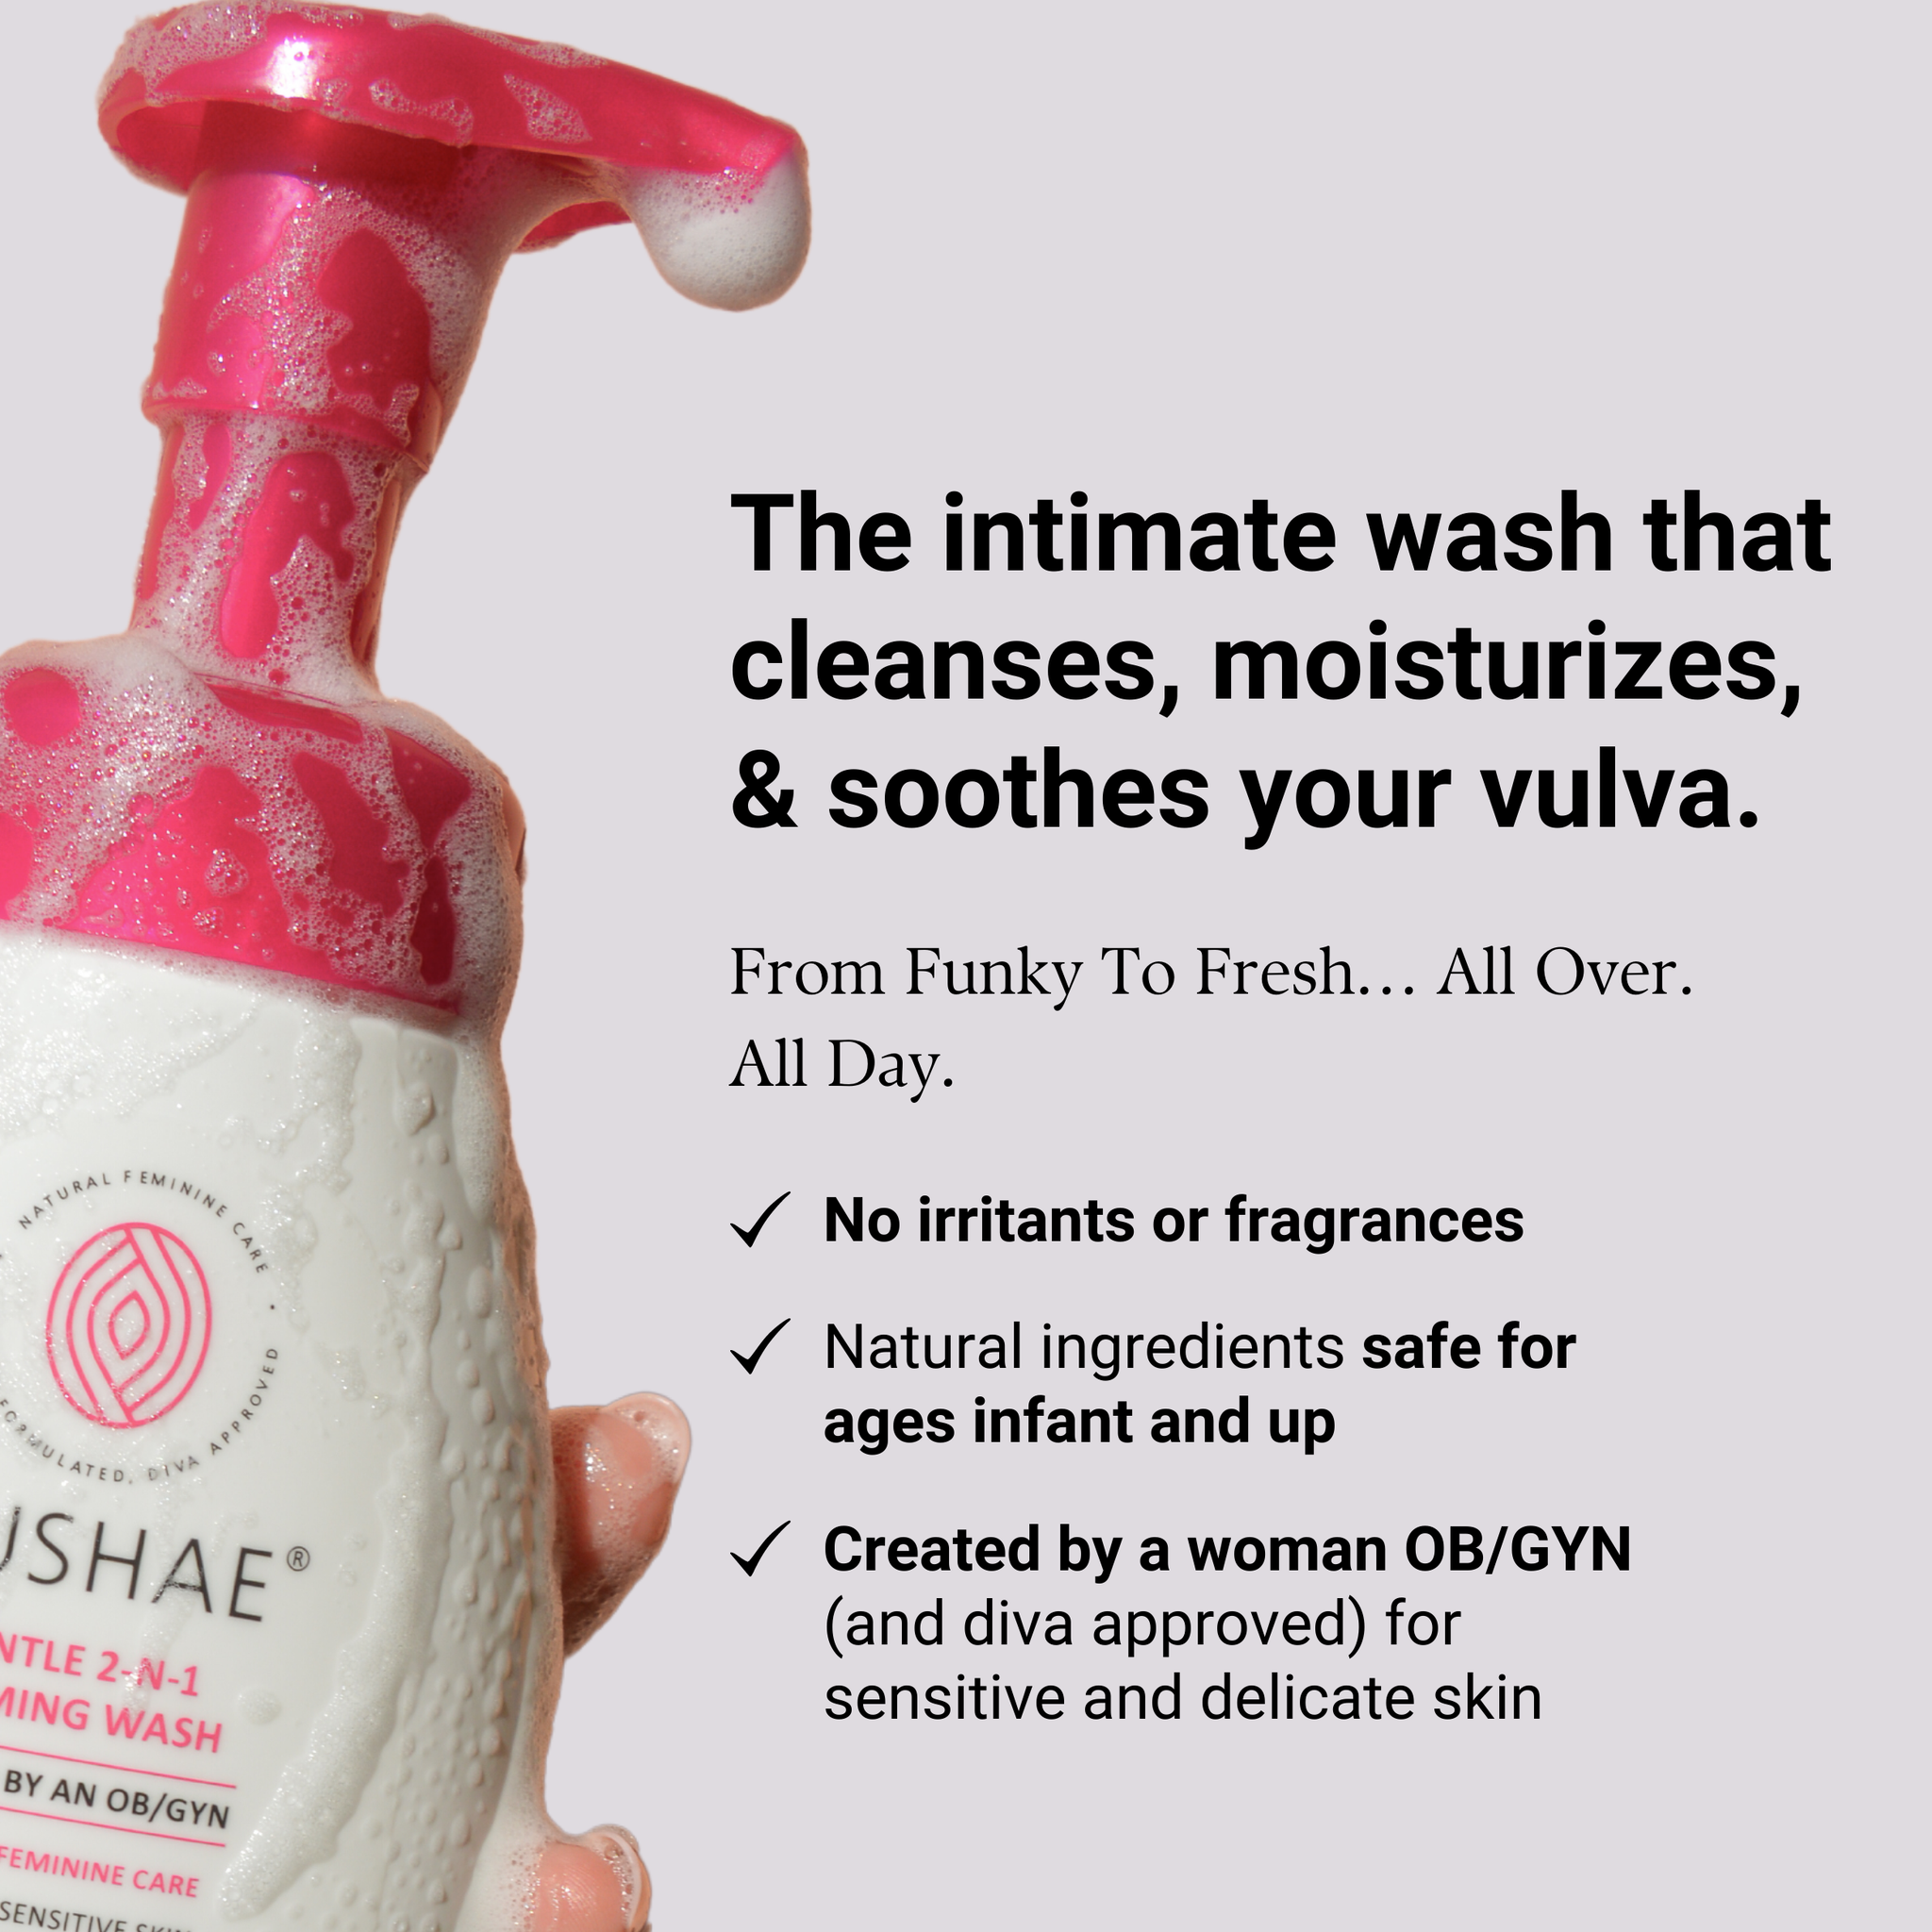 Kushae 2-in-1 Foaming Vaginal Wash and Shaving Adult Picture